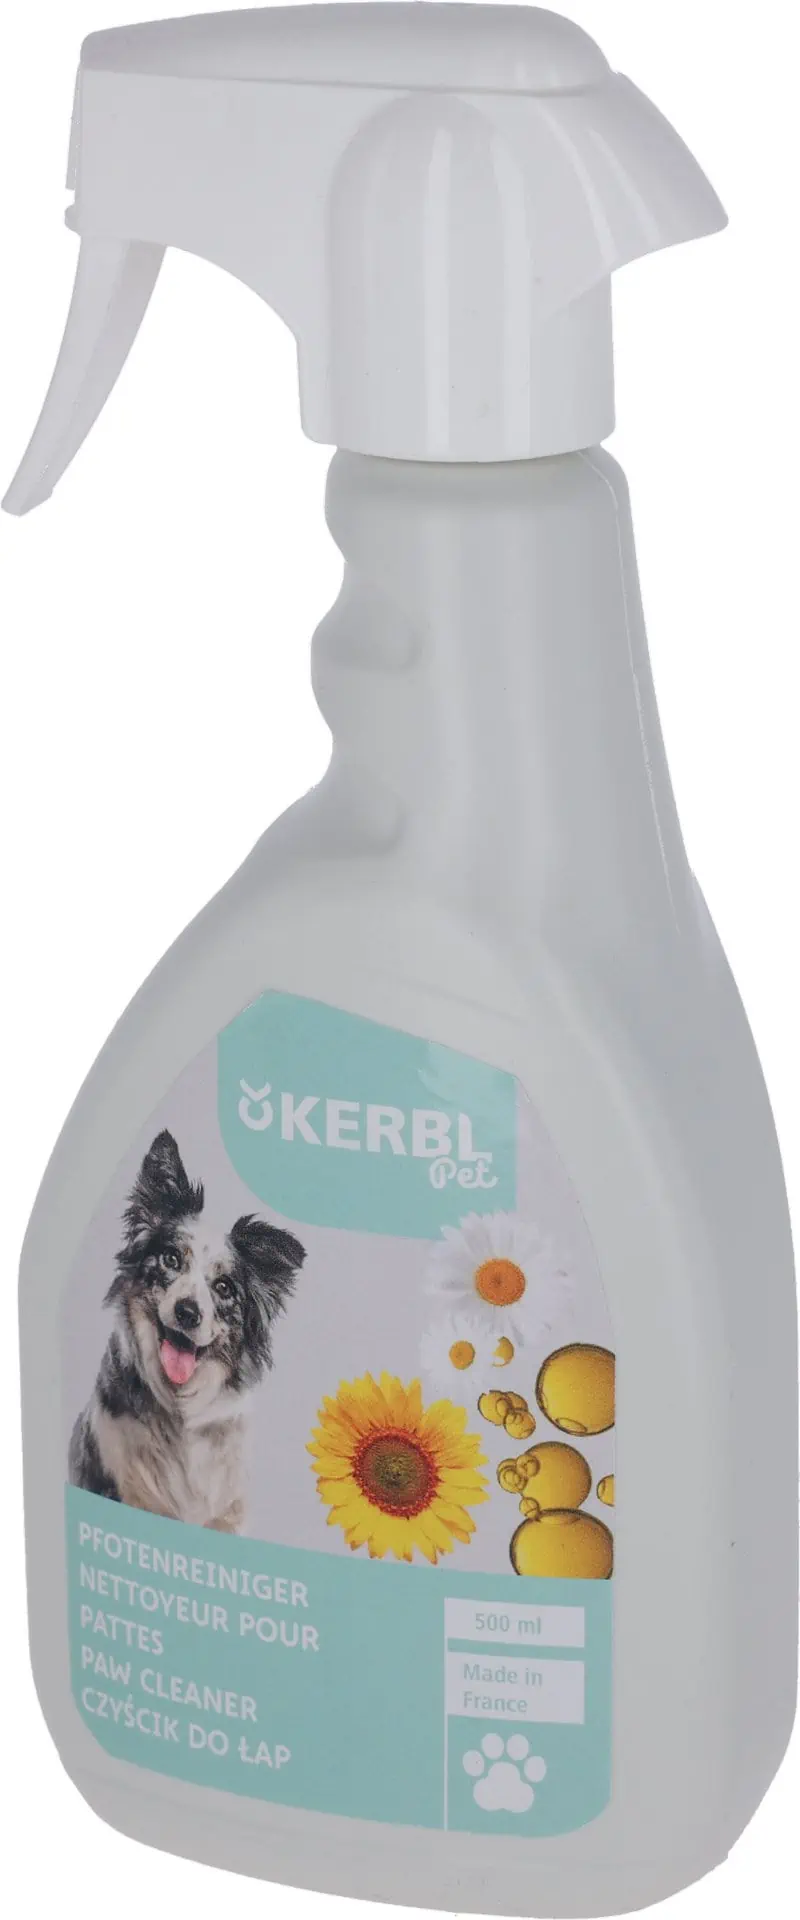 Paw Cleaner, 500 ml 